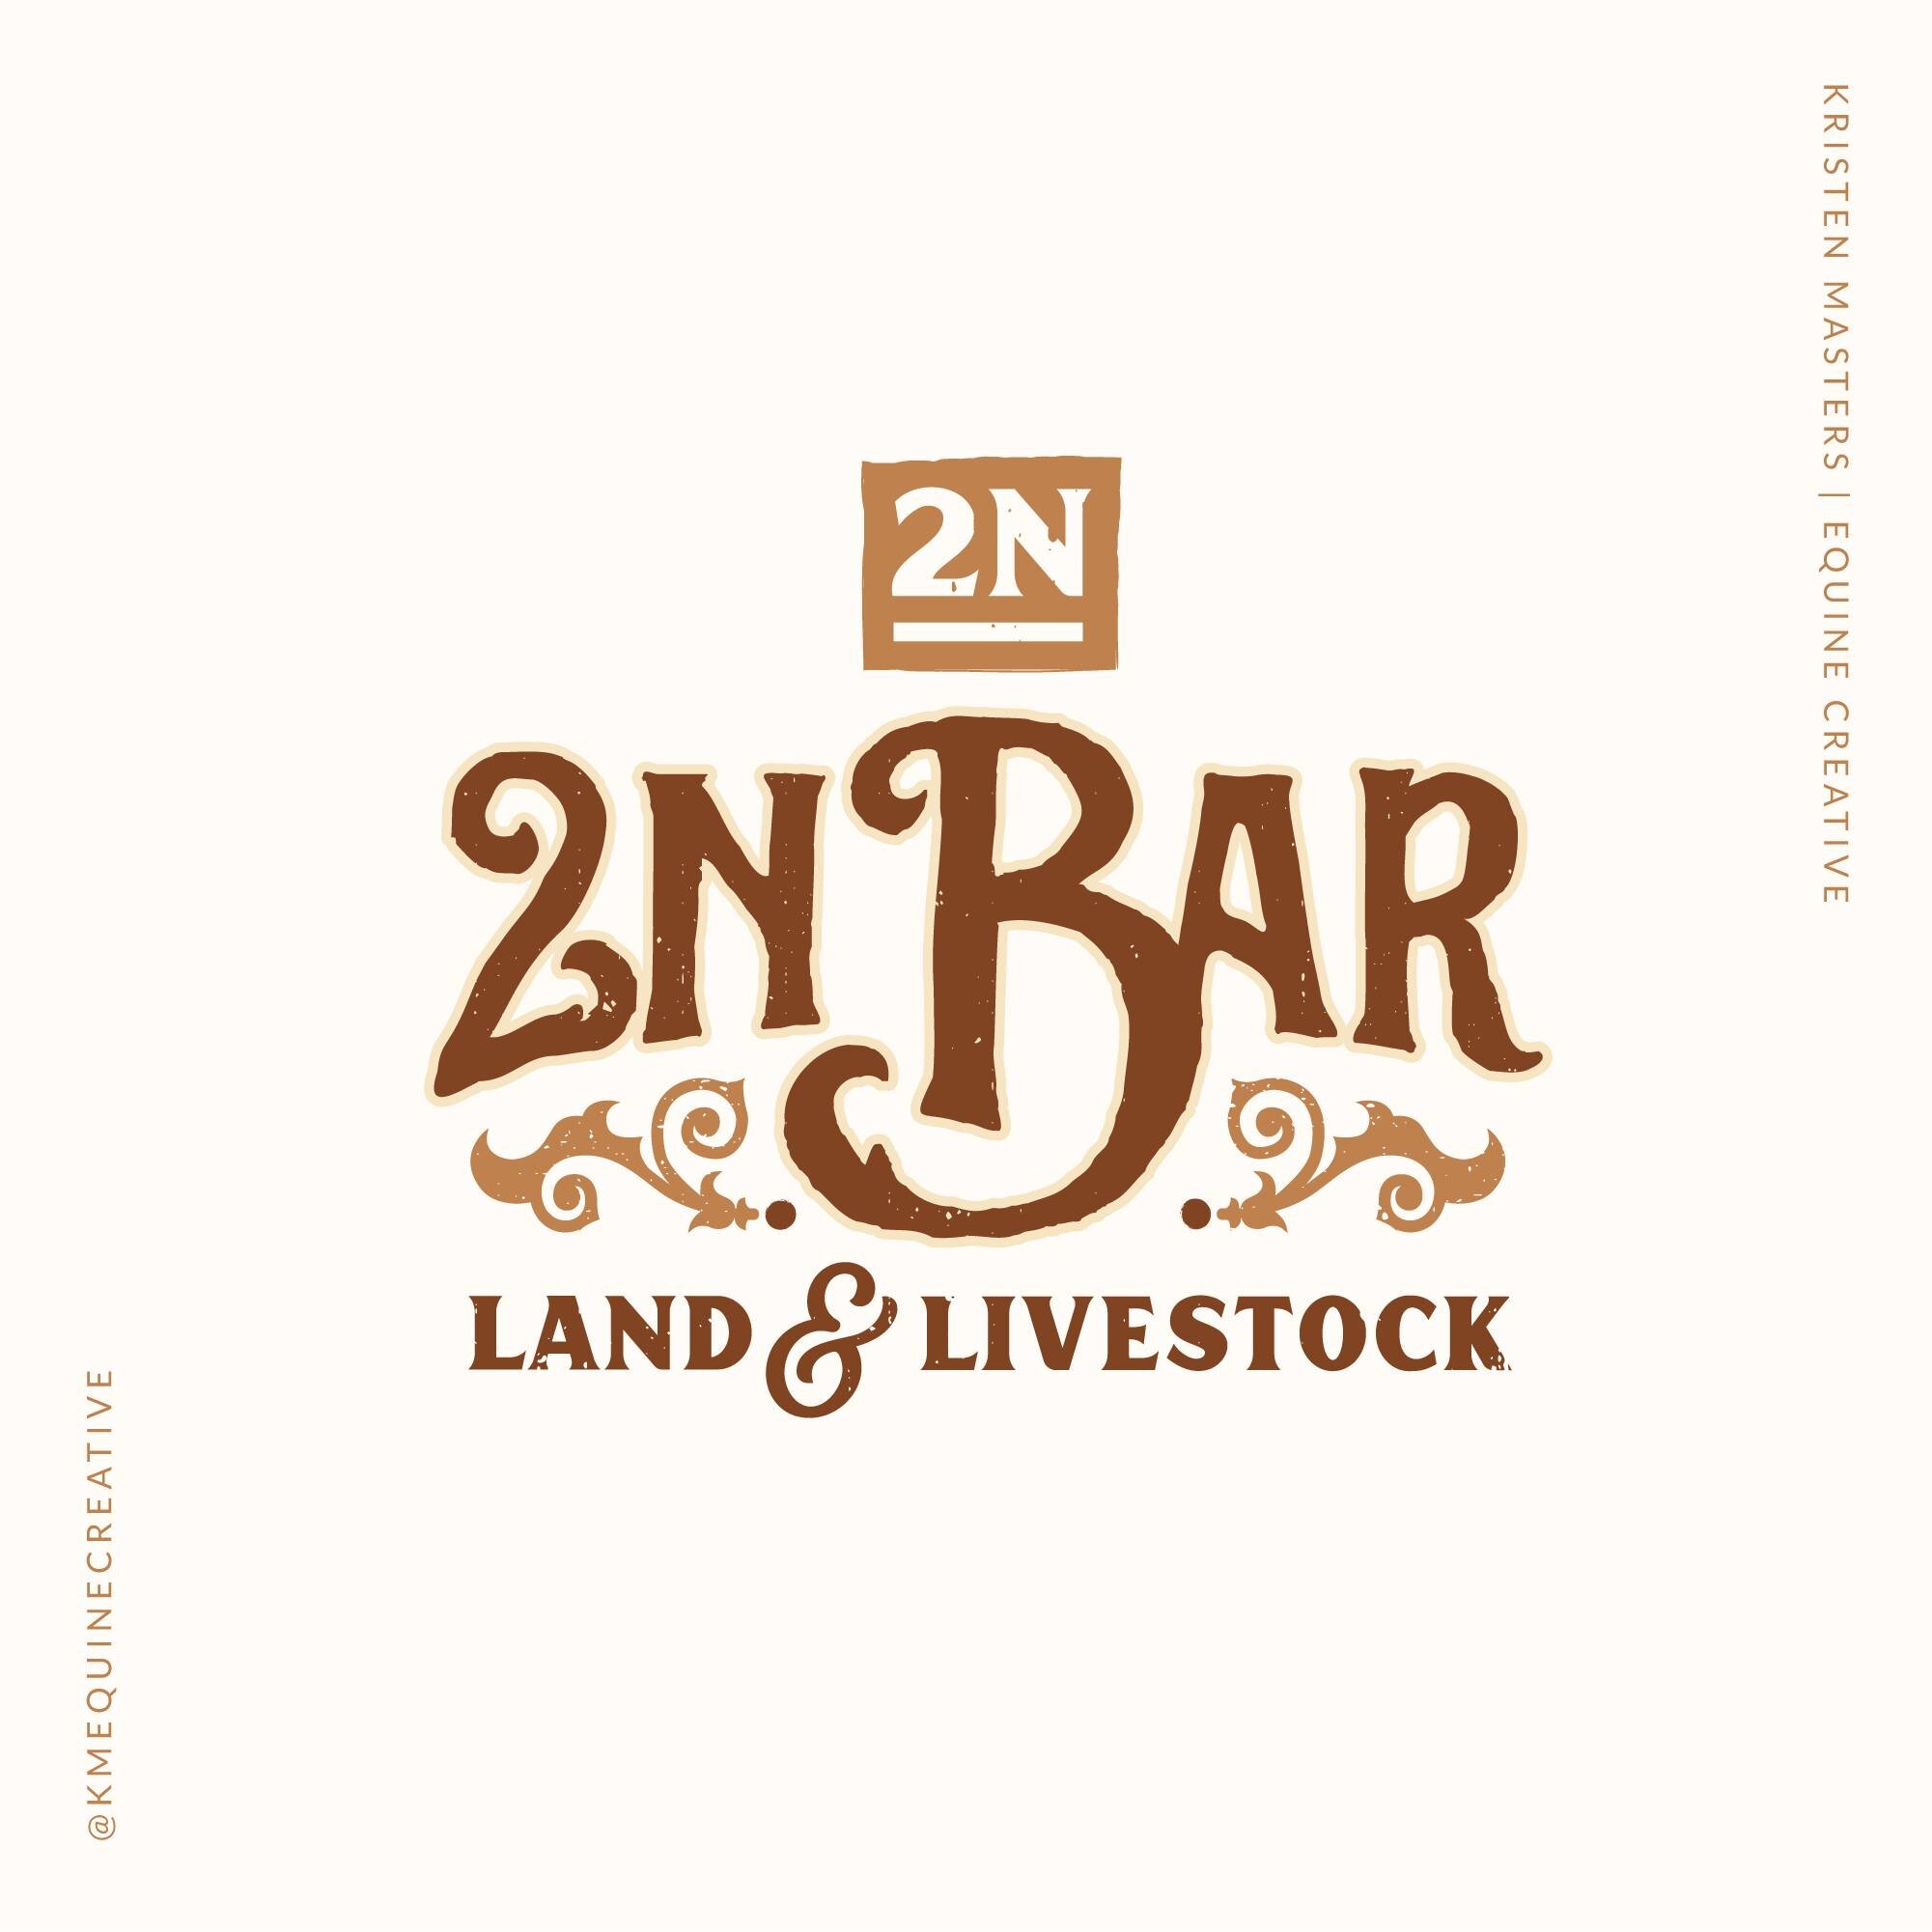 A recent logo design developed for 2N Bar Land &amp; Livestock!

Our goal was to develop a bold, classic mark with natural colors in mind while incorporating the 2N Bar brand and some timeless western flair. This design is going to look great on sign